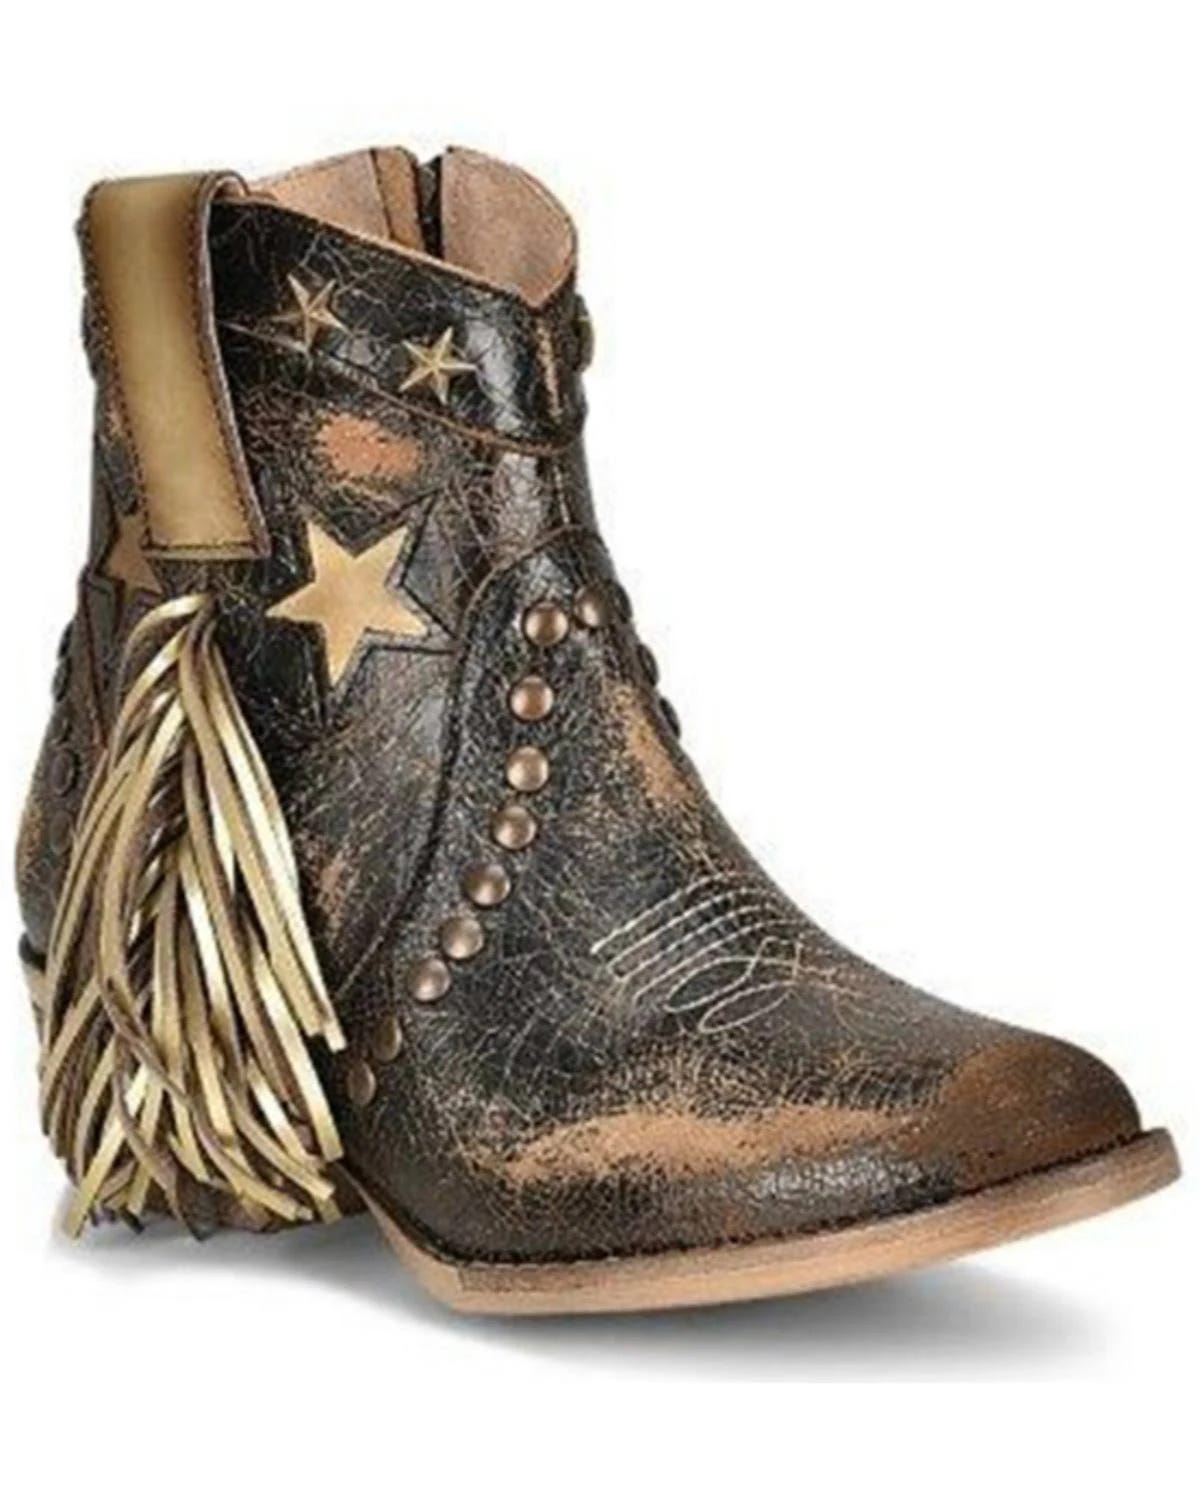 Circle G Western Fringe Booties with Gold Studs | Image